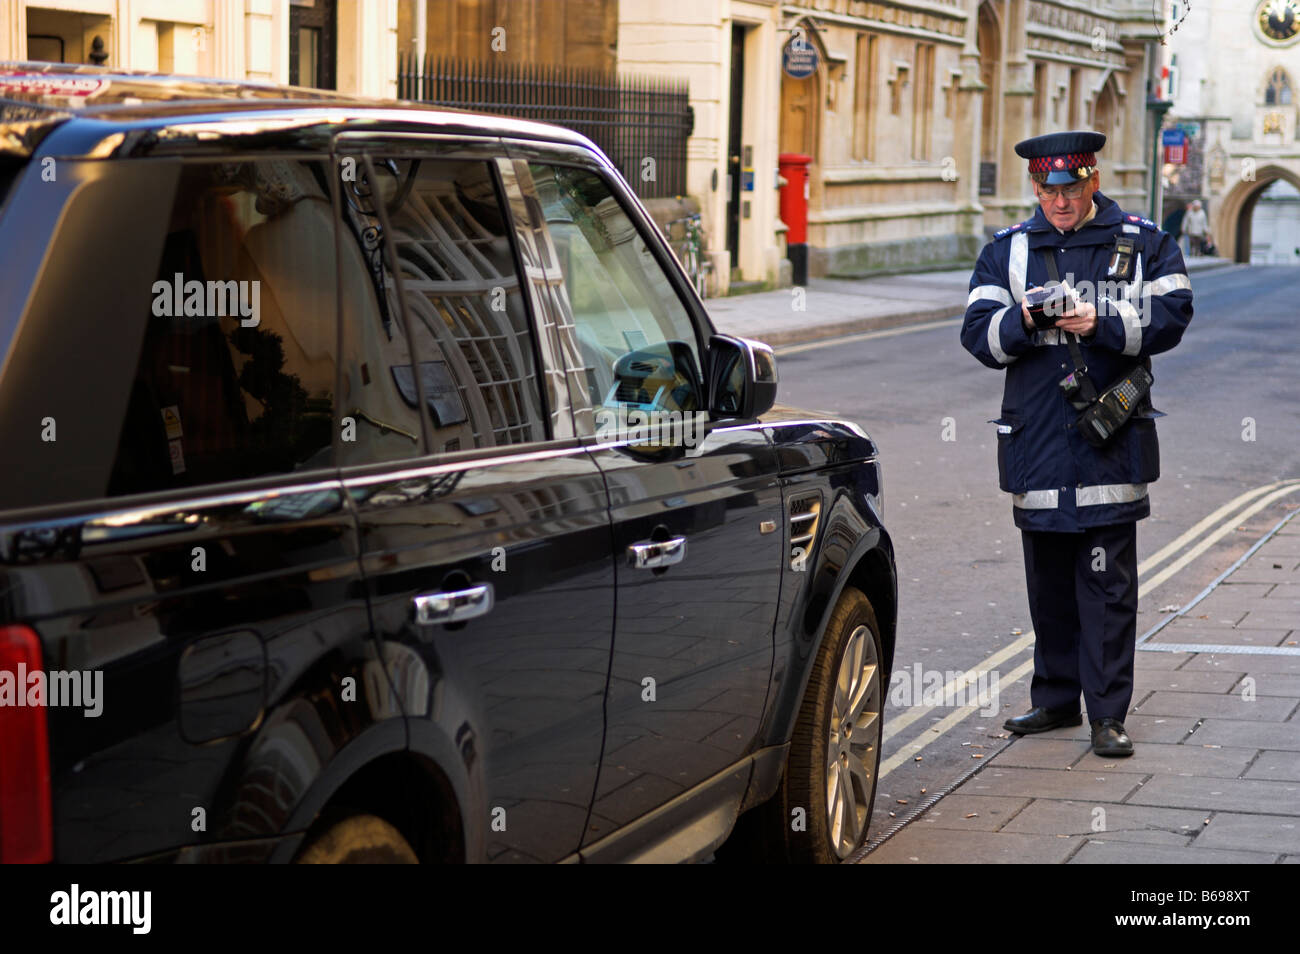 Traffic warden issuing a parking ticket on car illegally parked on double yellow lines Stock Photo